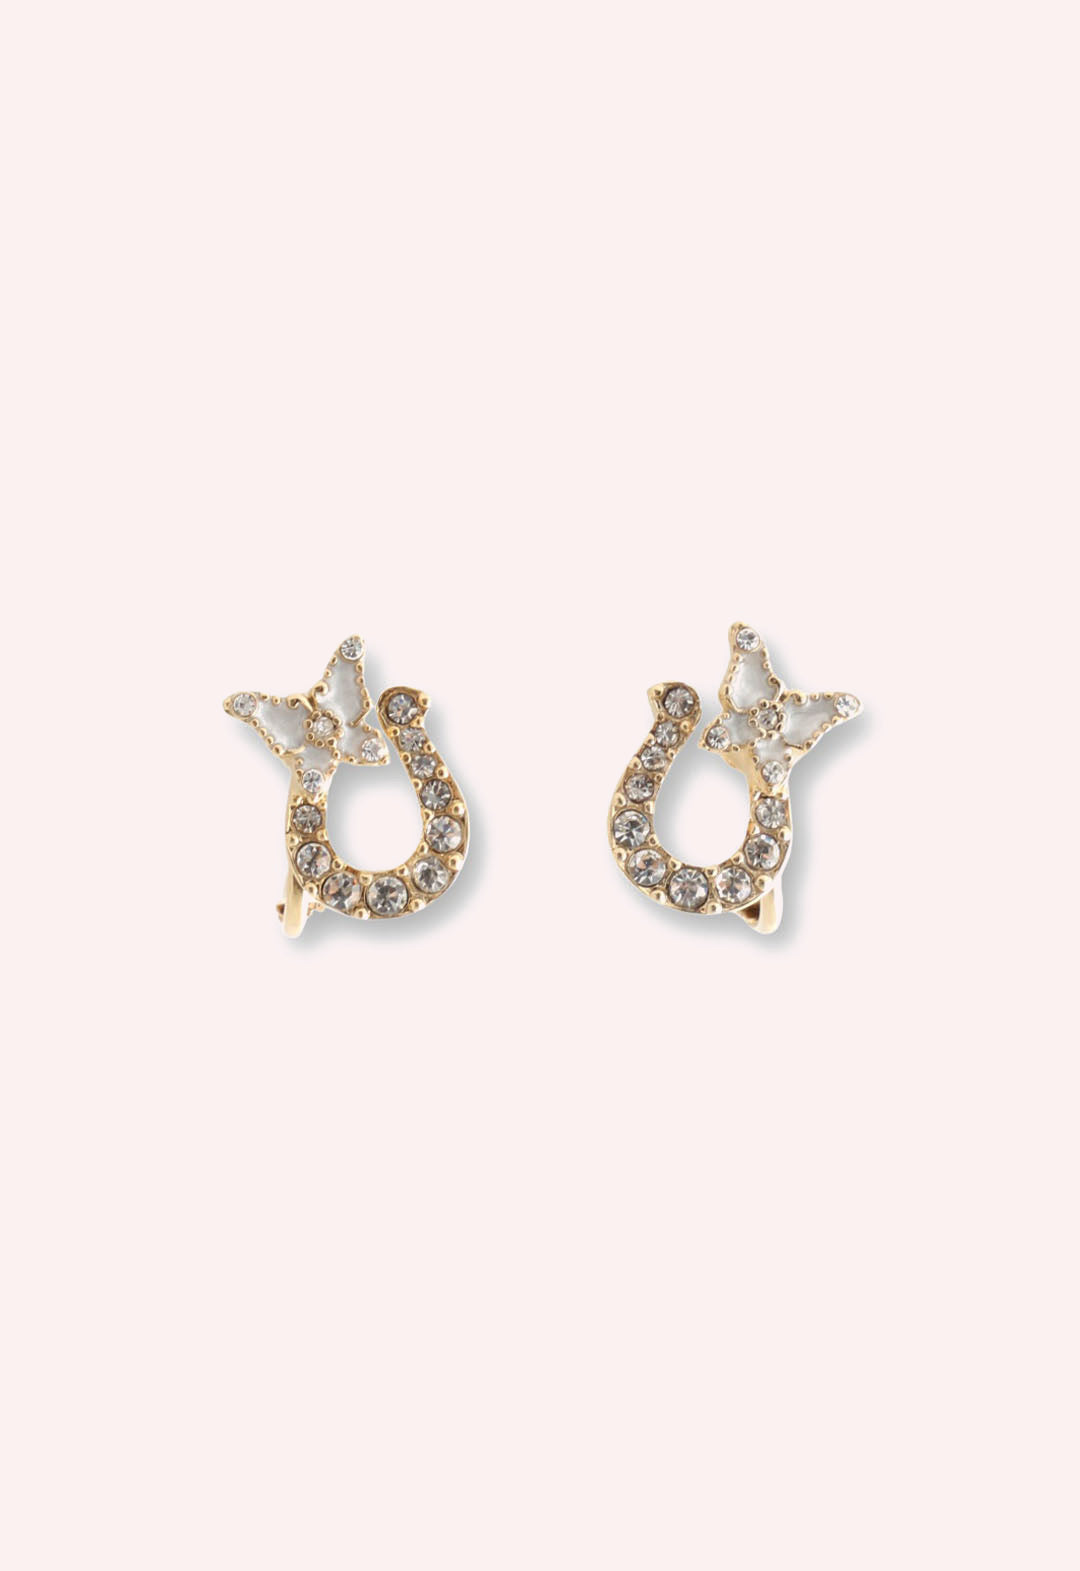 Gold horseshoe Earrings with a butterfly on top, Adorned with Gems